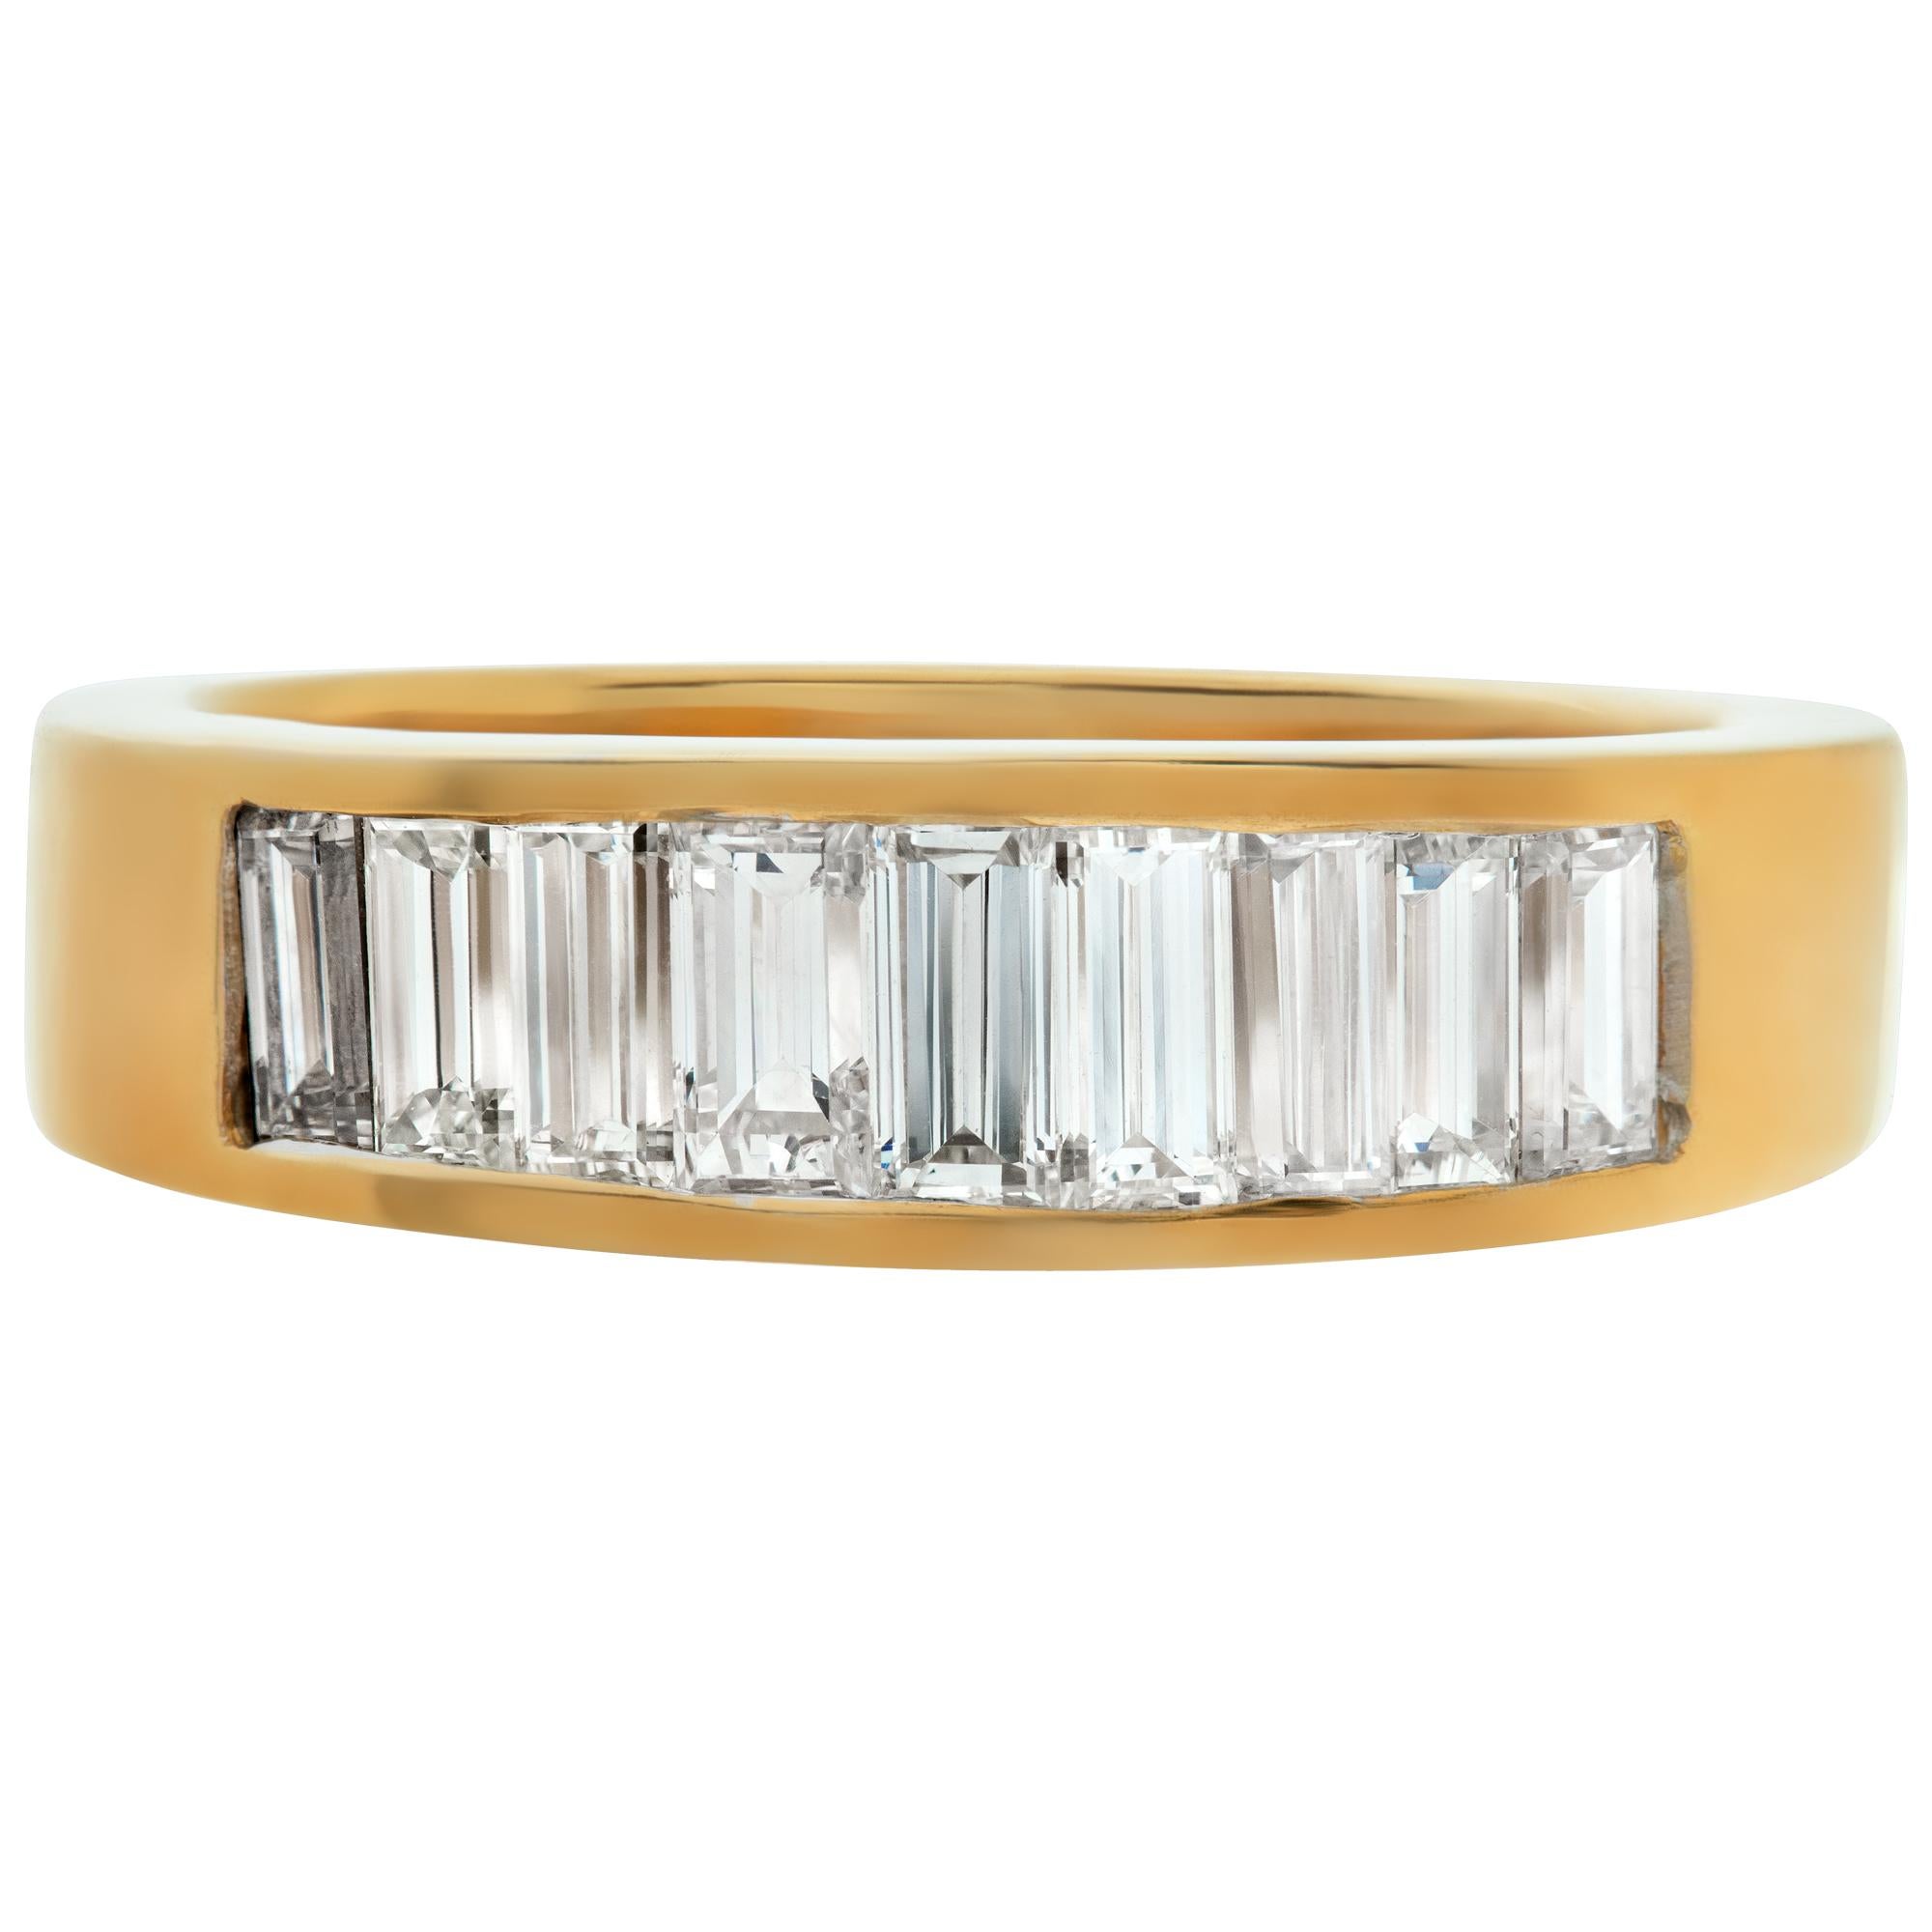 Baguette diamond wedding band in 18k yellow gold with approximately 1.4 carats in baguette cut diamonds (G-H Color, VS Clarity). Size 6.75This Diamond ring is currently size 6.75 and some items can be sized up or down, please ask! It weighs 4.4